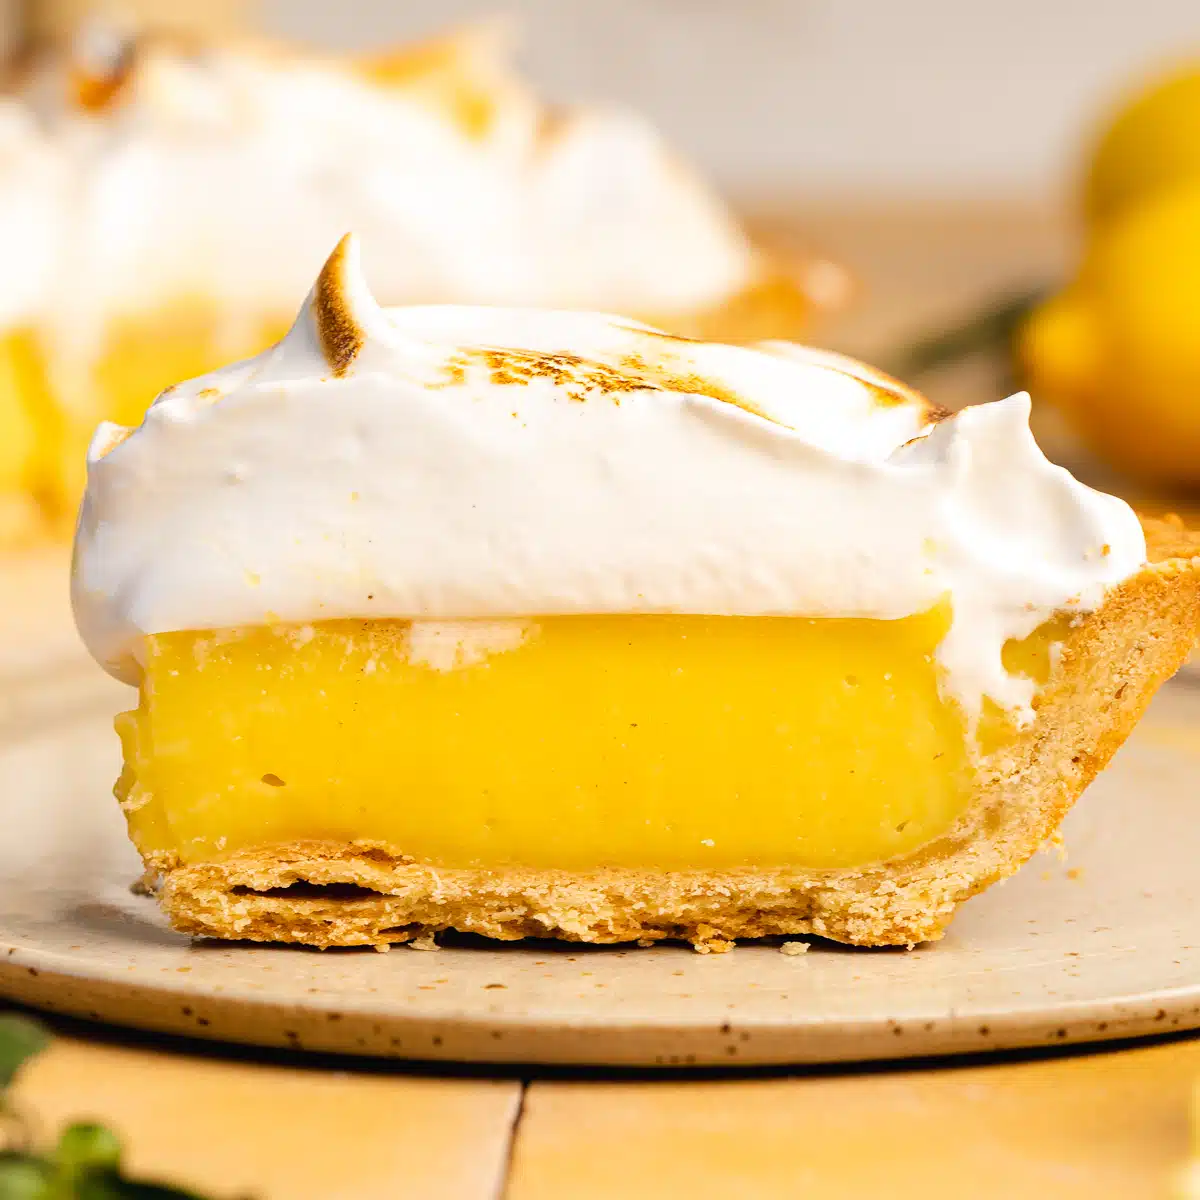 a close up side shot of a slice of lemon meringue pie showing a flaky crust and tall layers of bright yellow lemon curd filling and torched meringue topping.